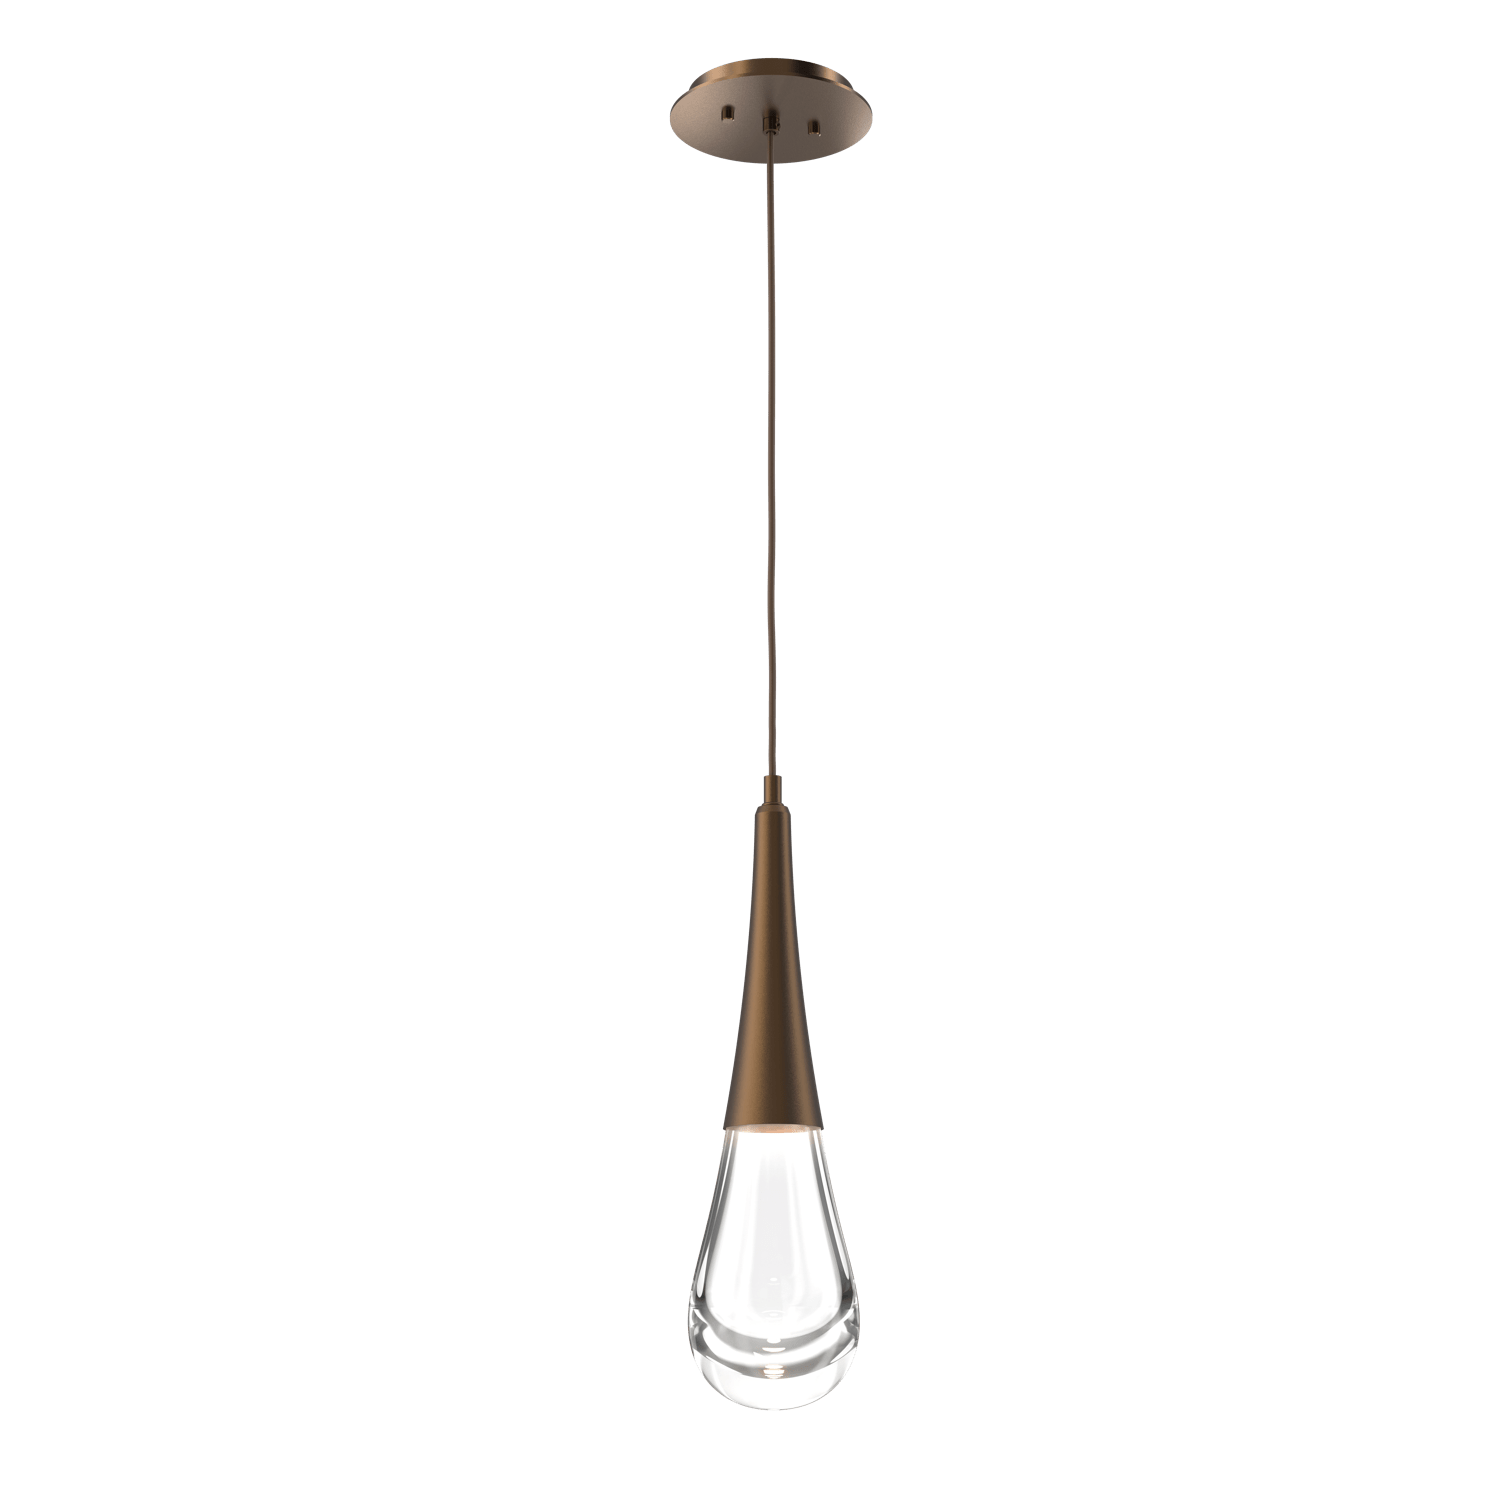 LAB0078-01-FB-Hammerton-Studio-Raindrop-pendant-light-with-flat-bronze-finish-and-clear-blown-glass-shades-and-LED-lamping